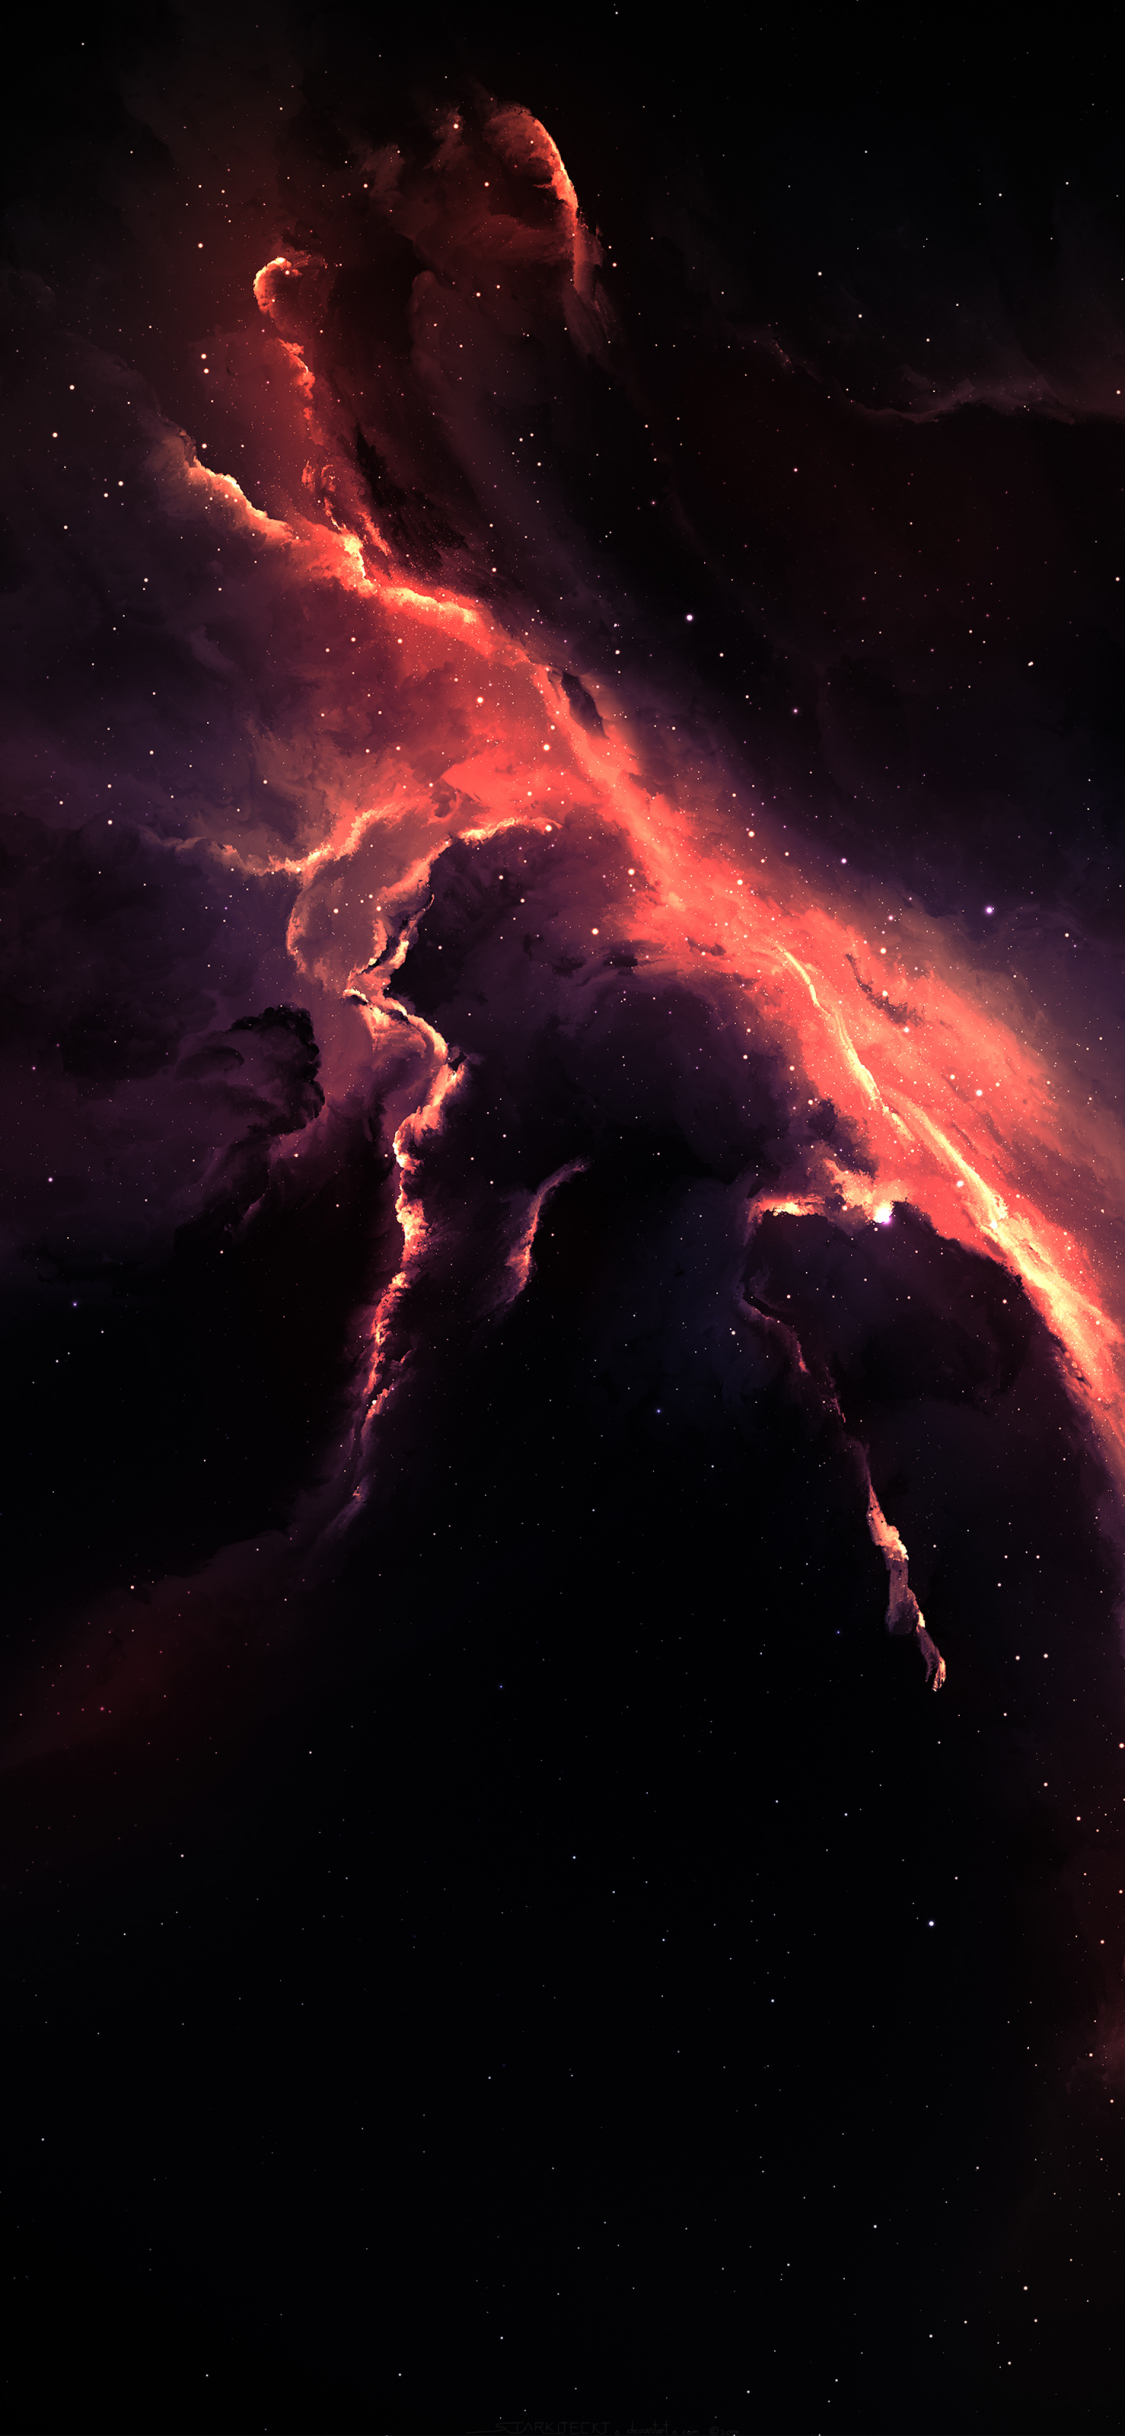 Download wallpaper 1125x2436 clouds, astronomy, galaxy, nebula, space ...